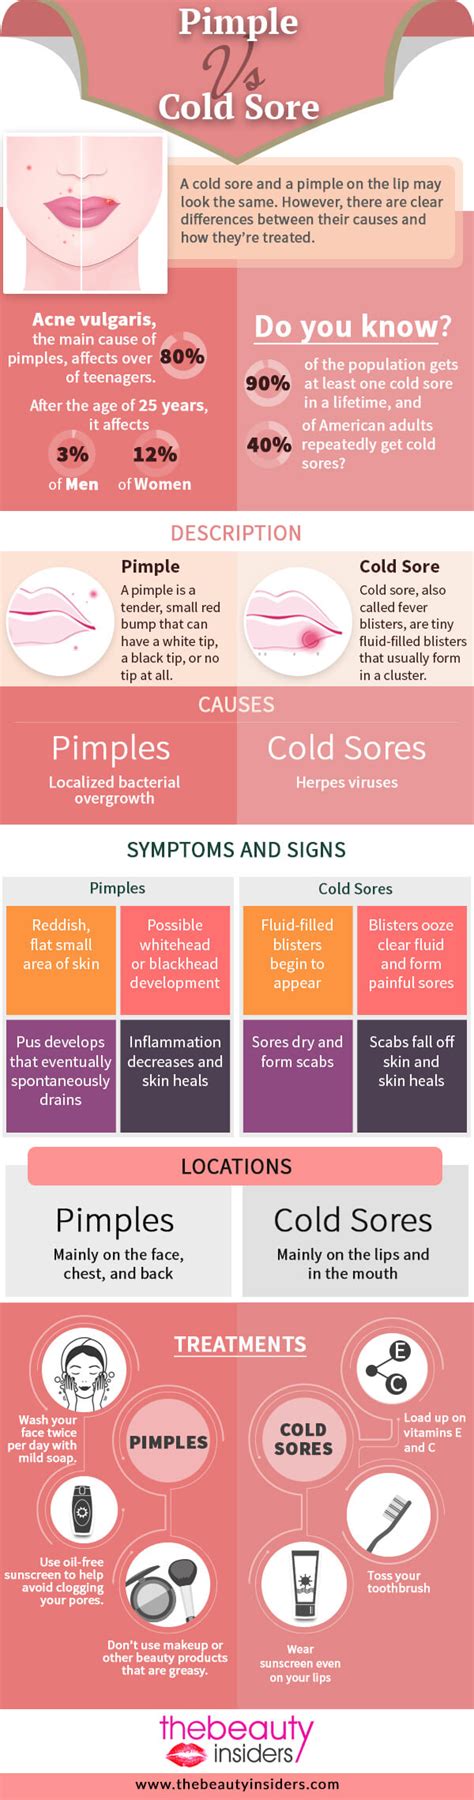 Pimple Vs Cold Sore Learn How To Treat Them Effectively